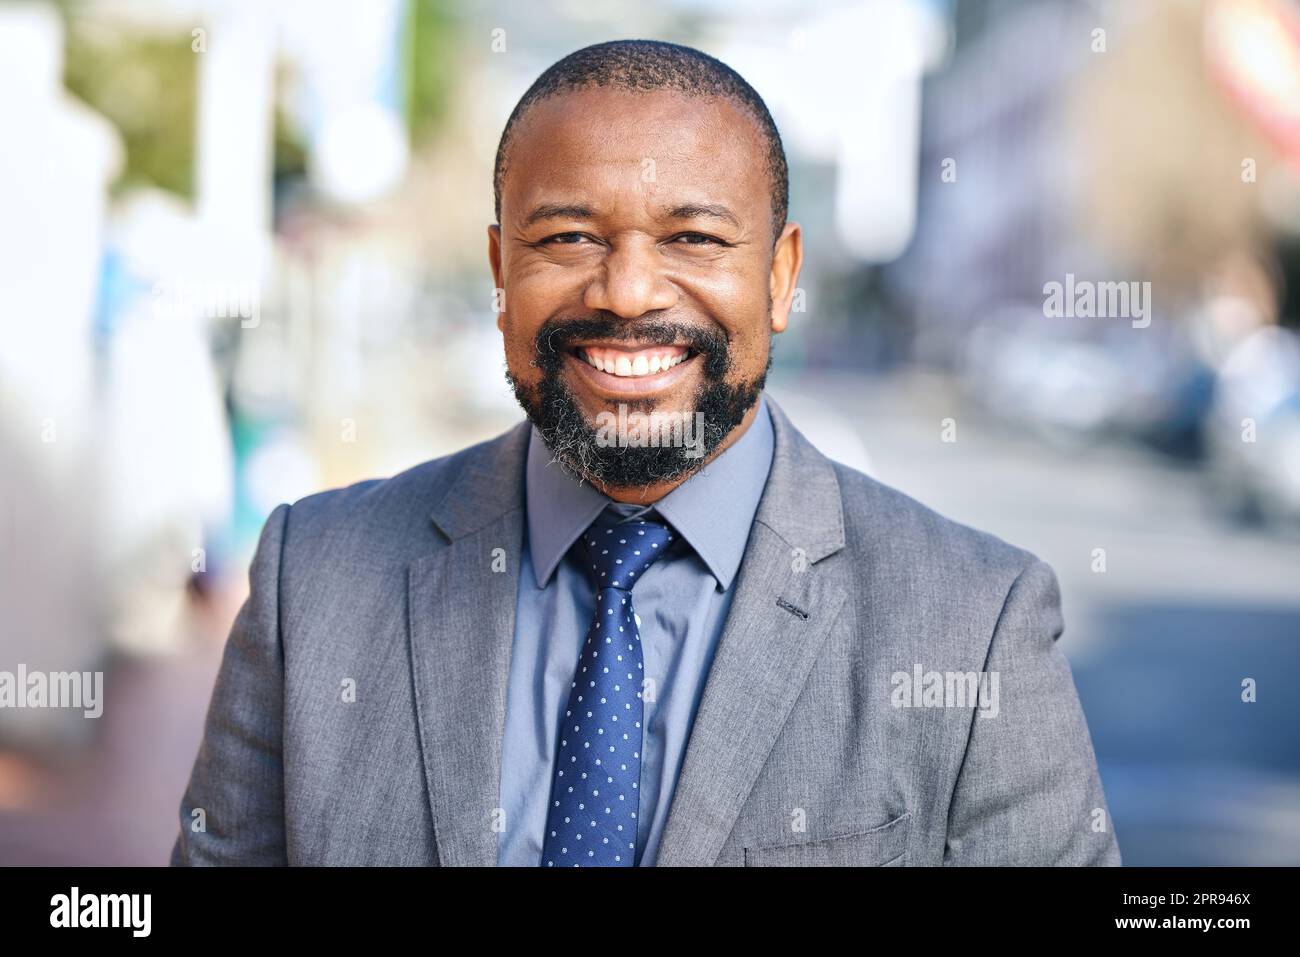 Its always a good day to work towards your goals. a businessman wearing a suit while out in the city. Stock Photo